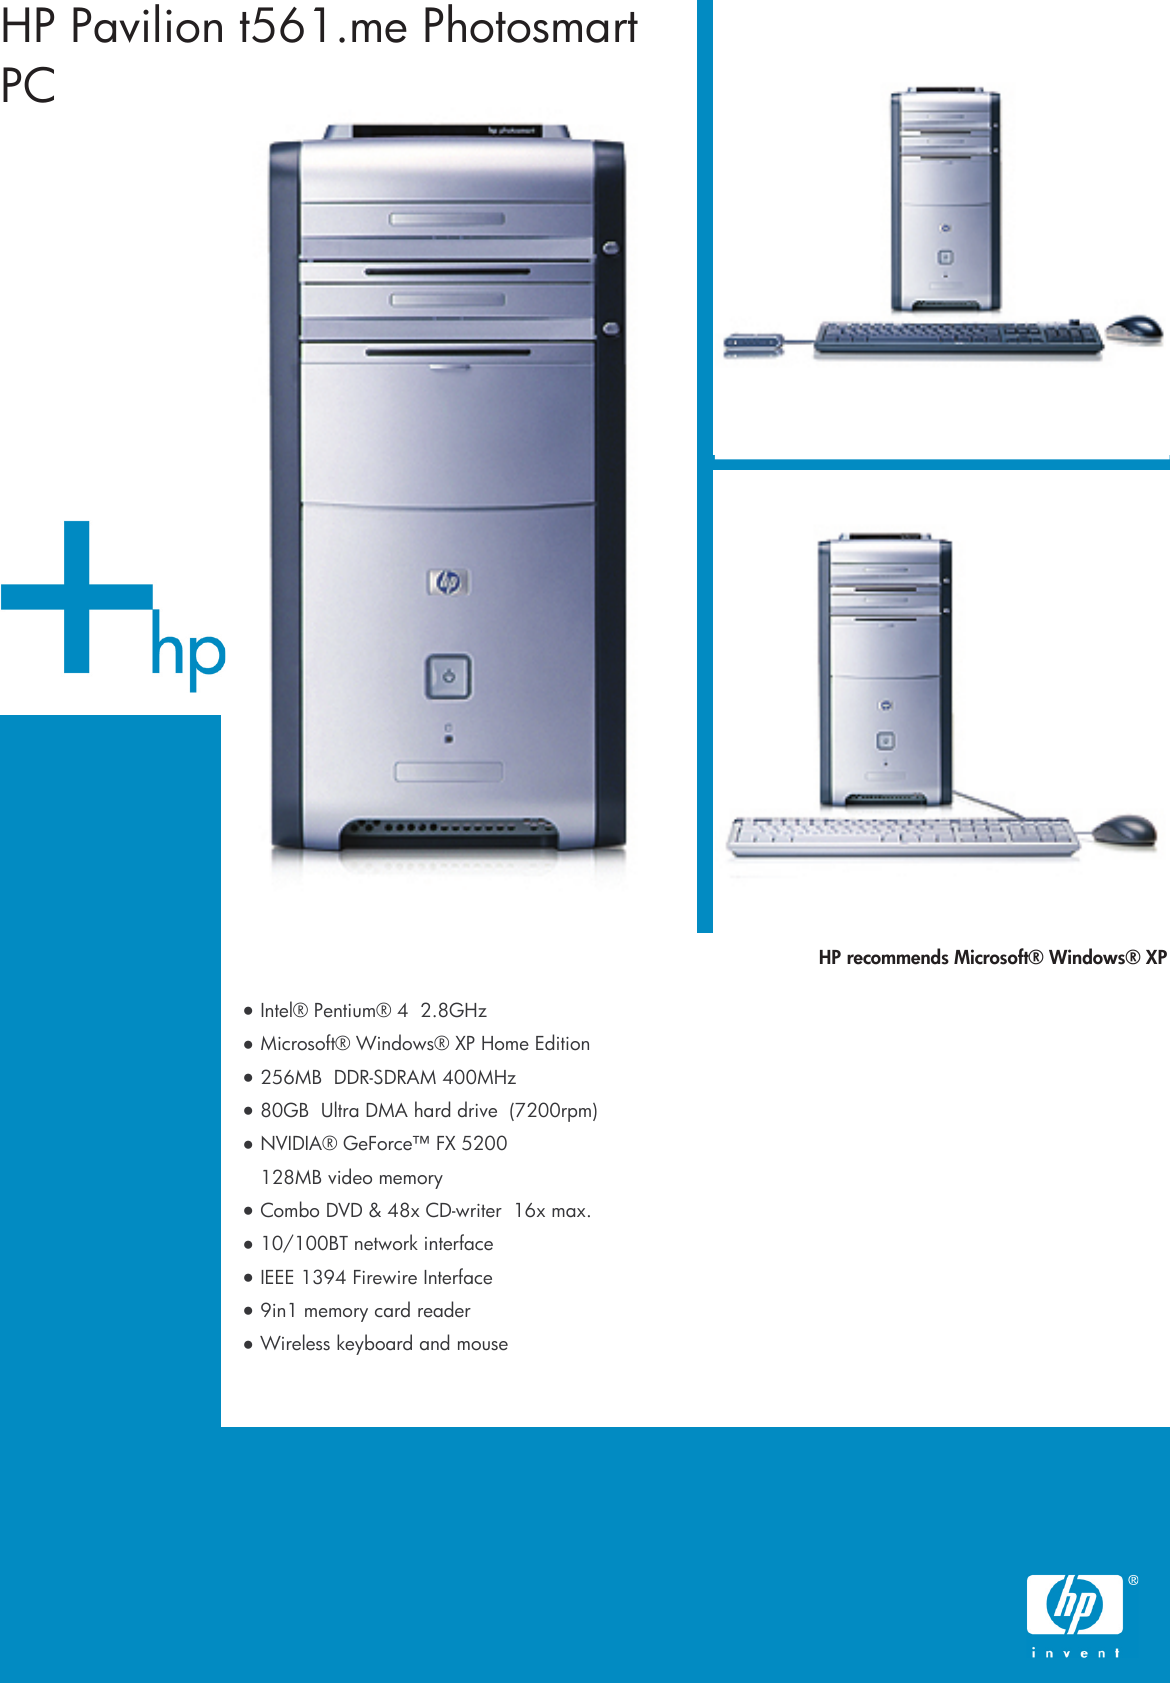 Page 1 of 2 - HP Summer Desktop Datasheet Pavilion PC - T561.me Product Specifications C00169894